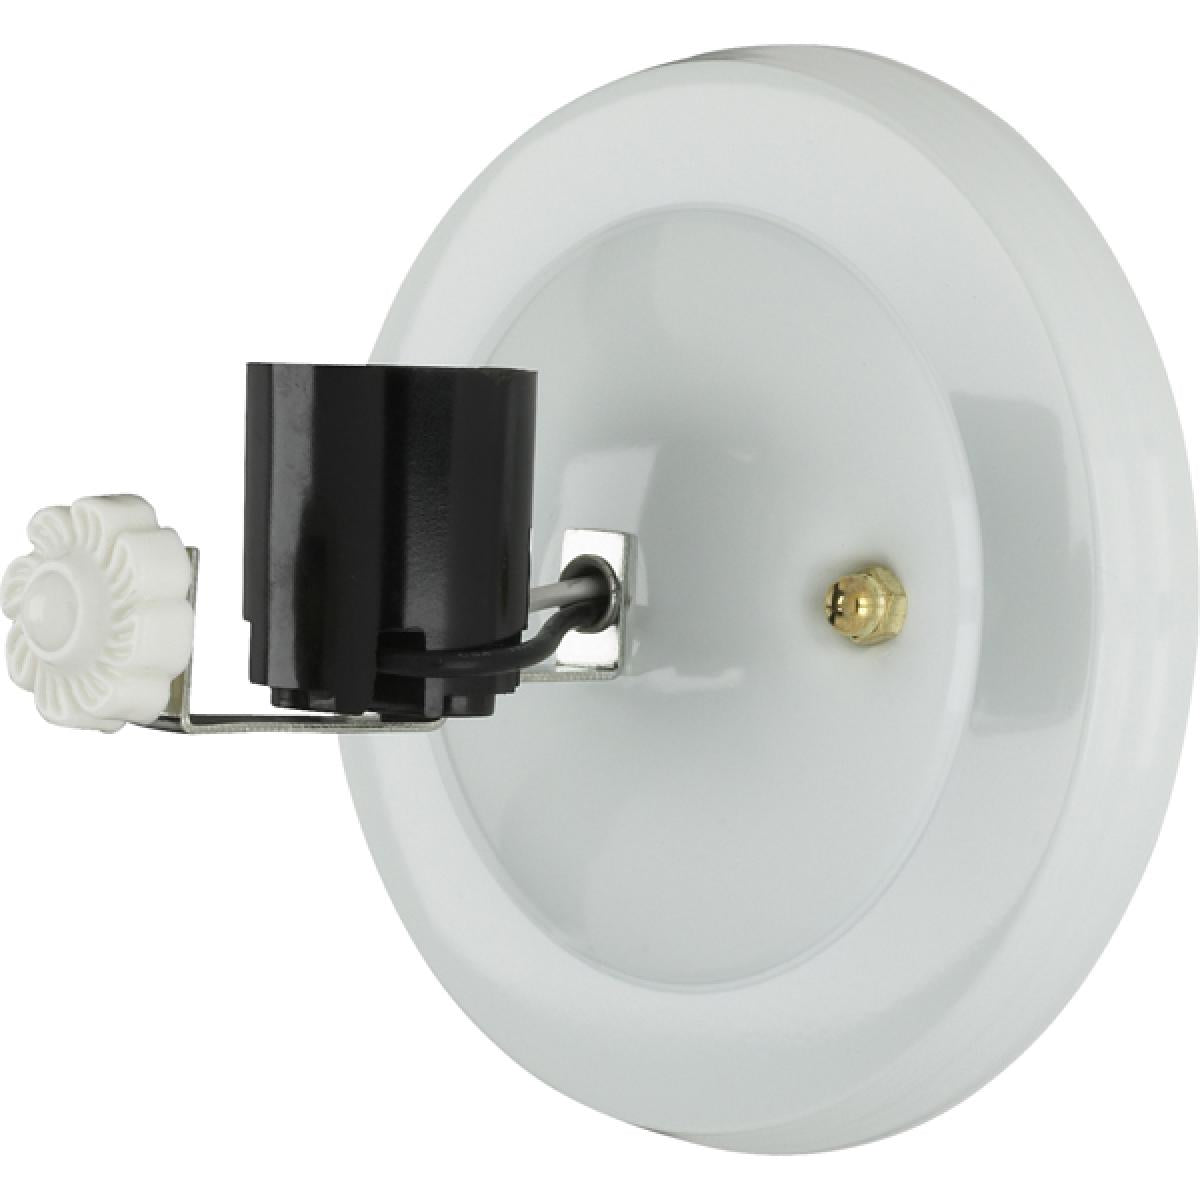 Satco 90-1299 1-Light U-Channel Glass Holder 1 Light For Use With 7" U-Bend Glass Includes Hardware